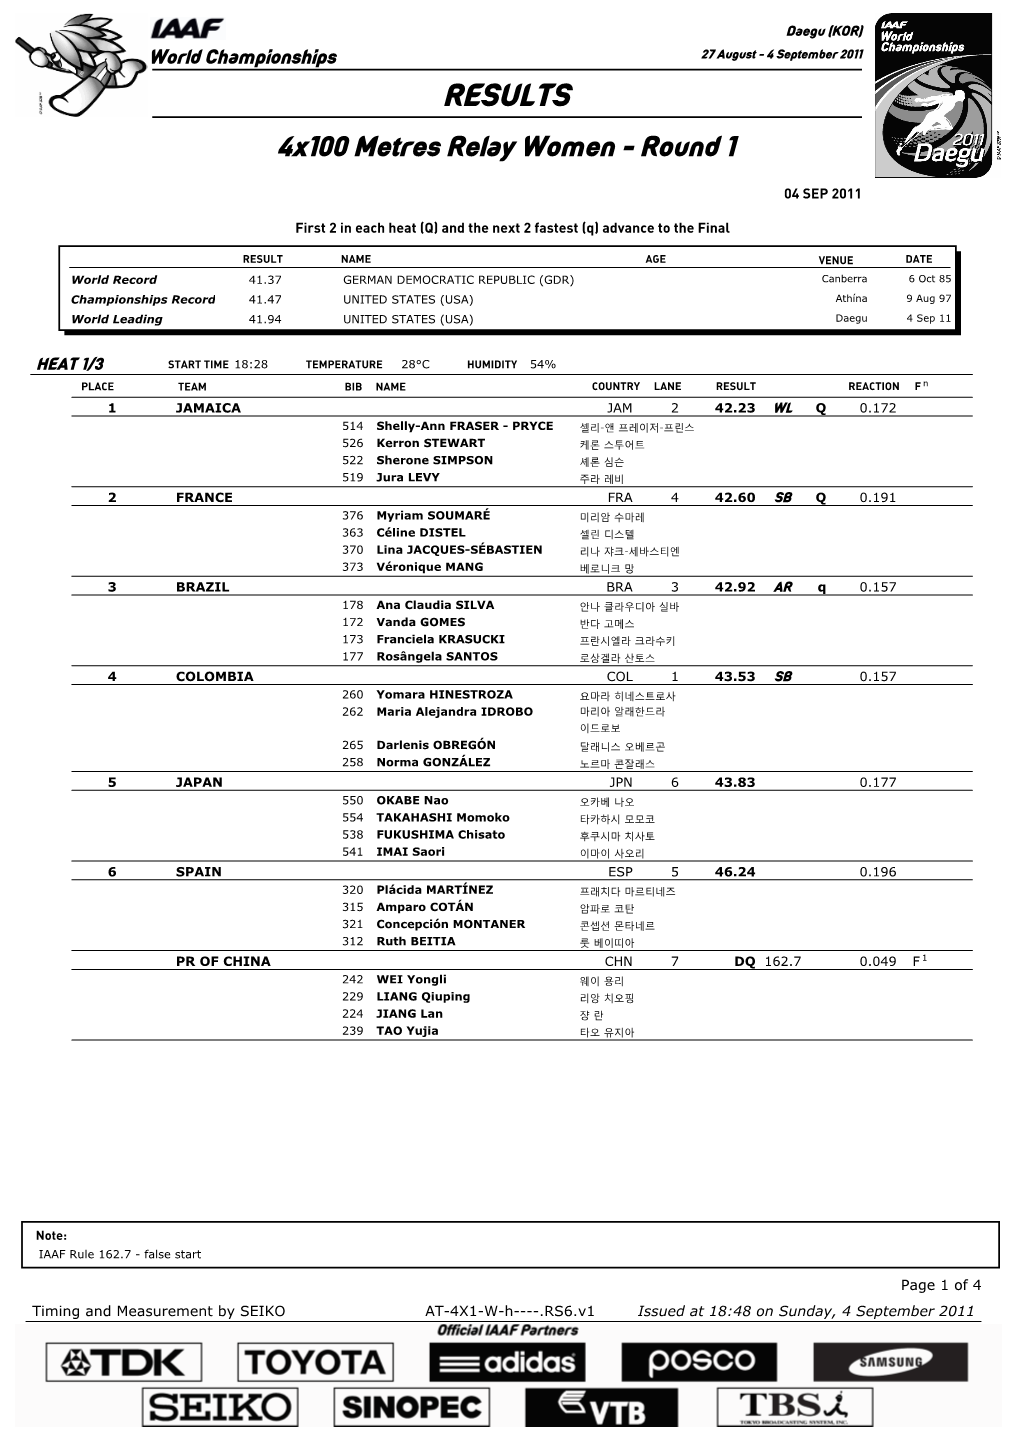 RESULTS 4X100 Metres Relay Women - Round 1